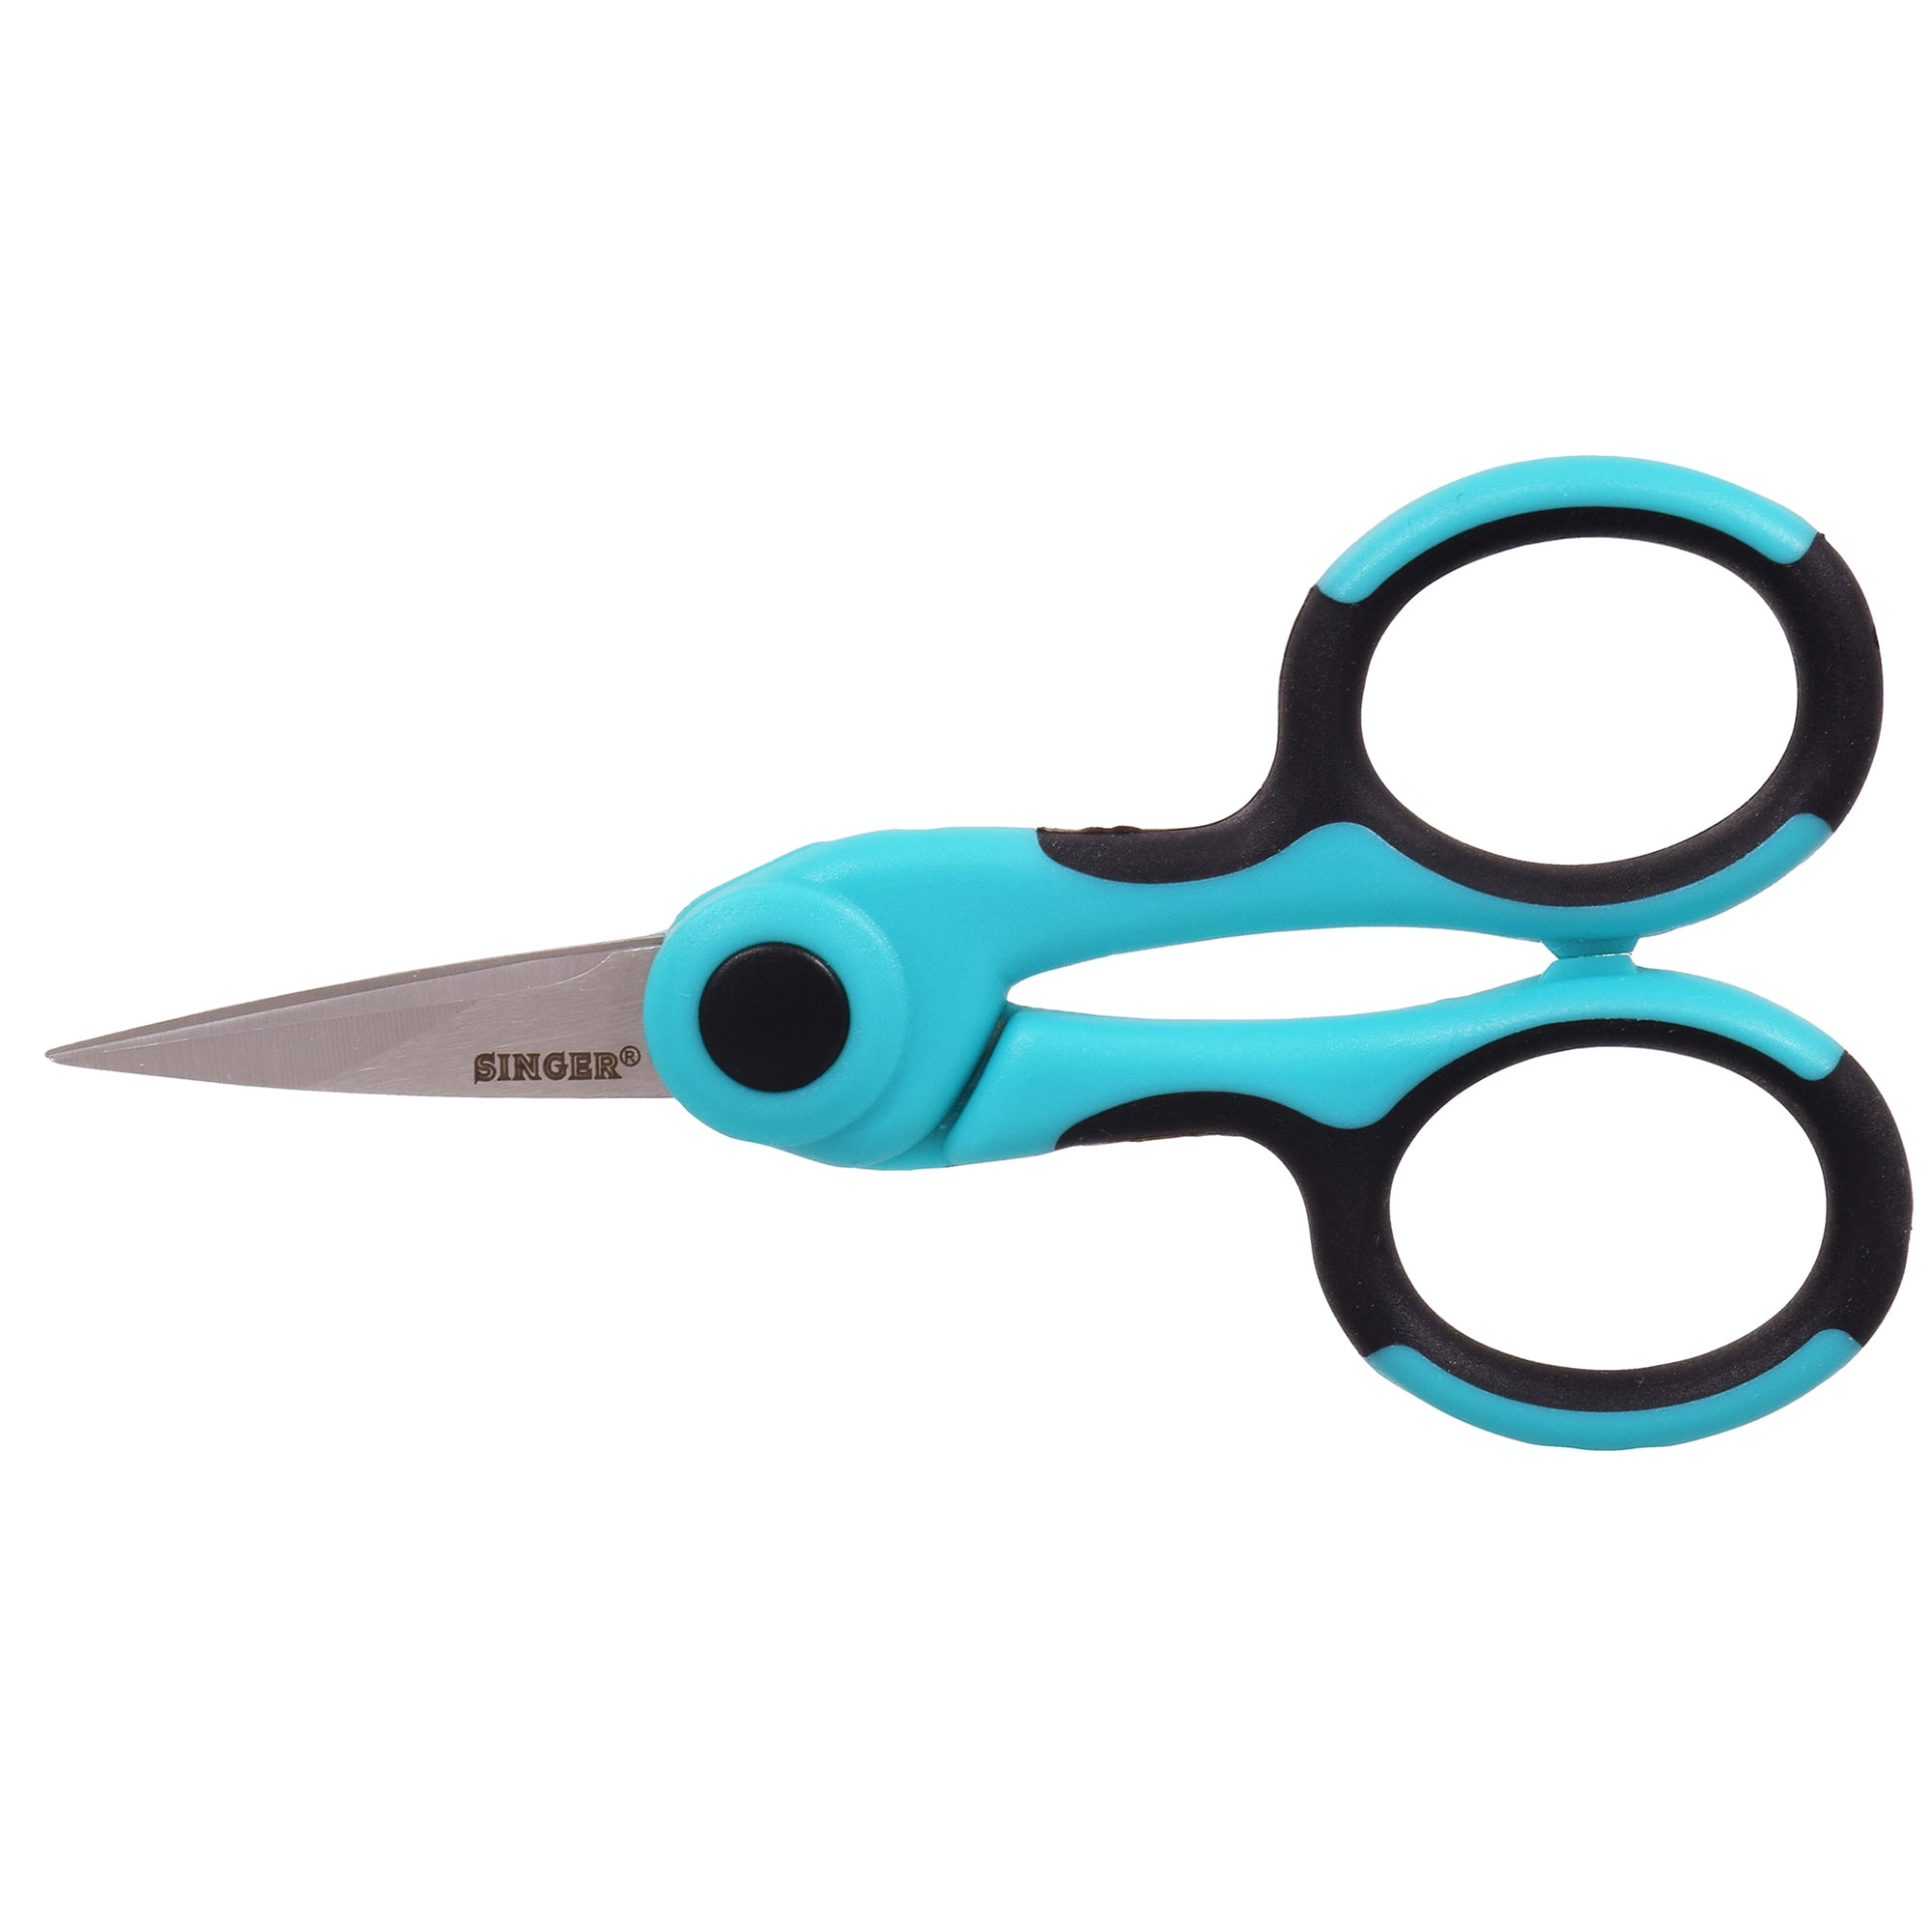 NEW STAINLESS STEEL COMFORT GRIP 2 PACK SCISSORS KITCHEN CRAFT SEWING